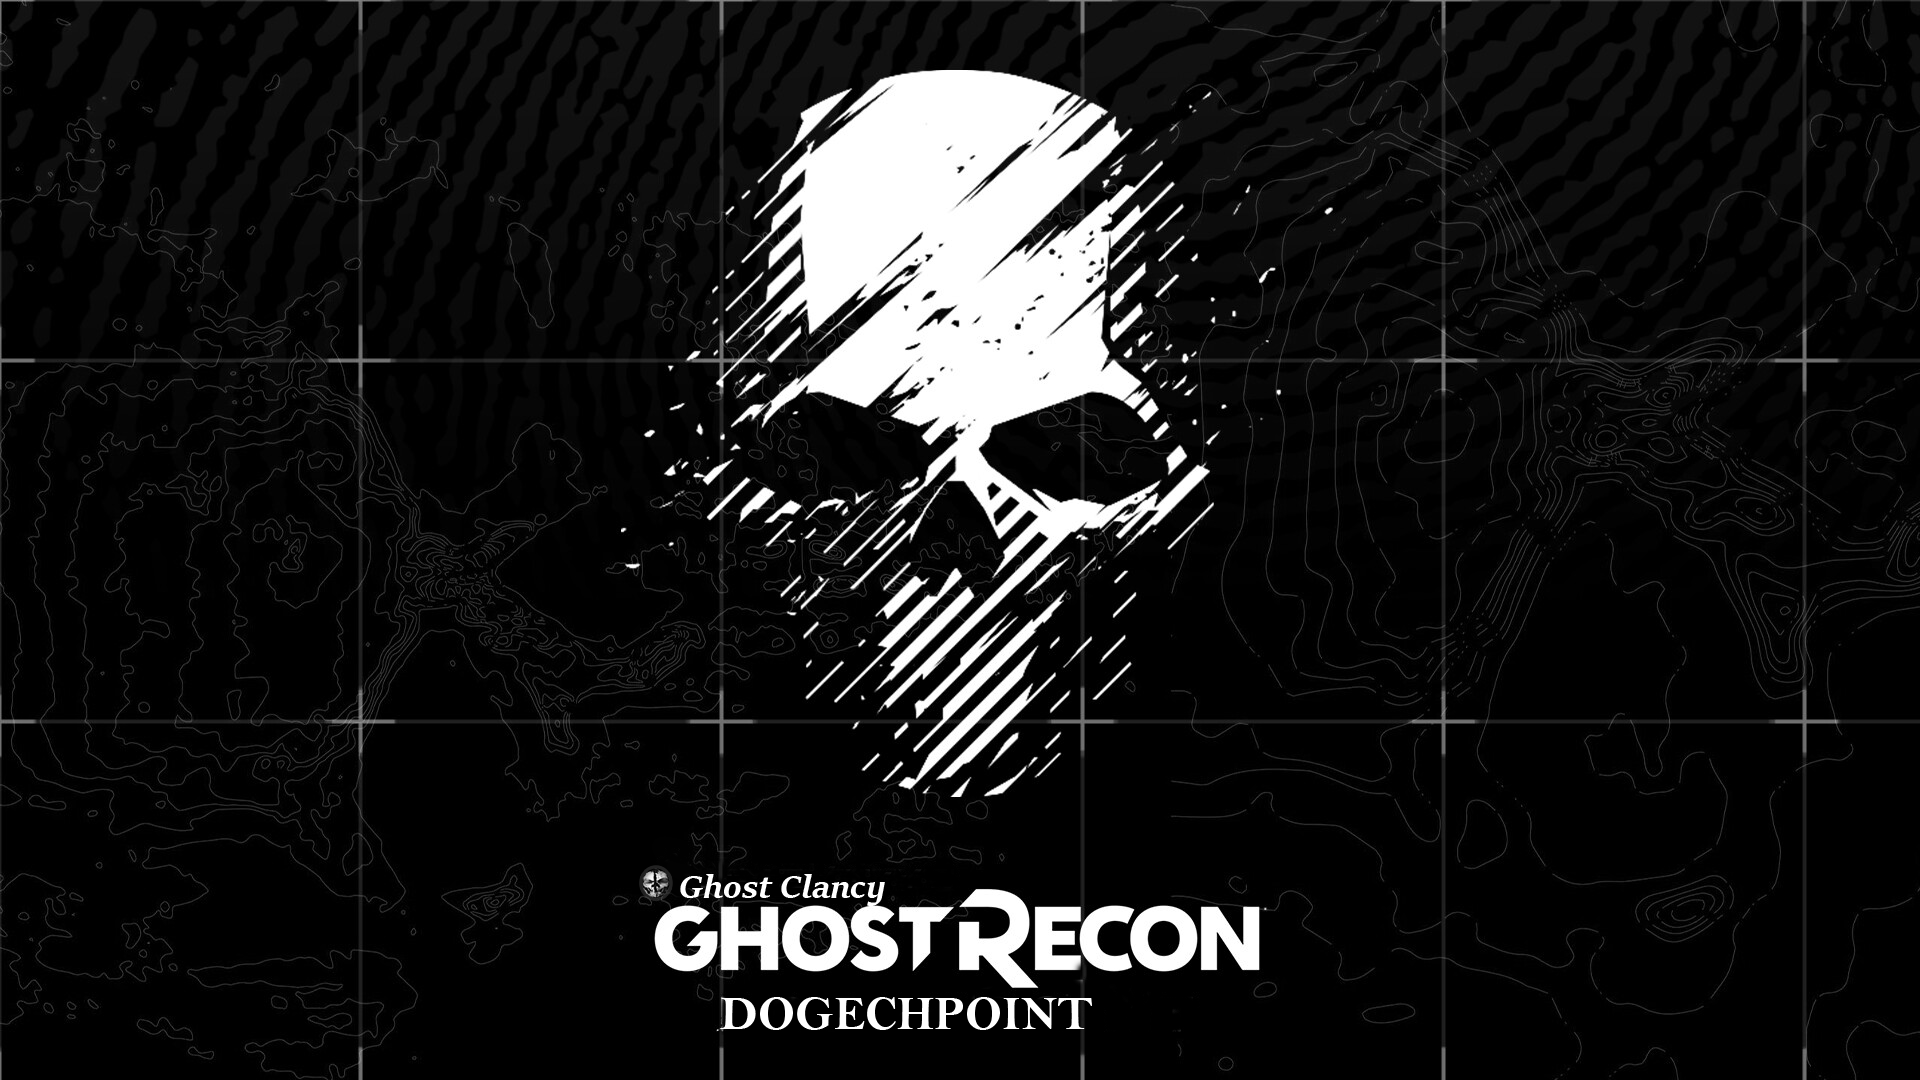 Ghost Recon Dogechpoint Arma 3